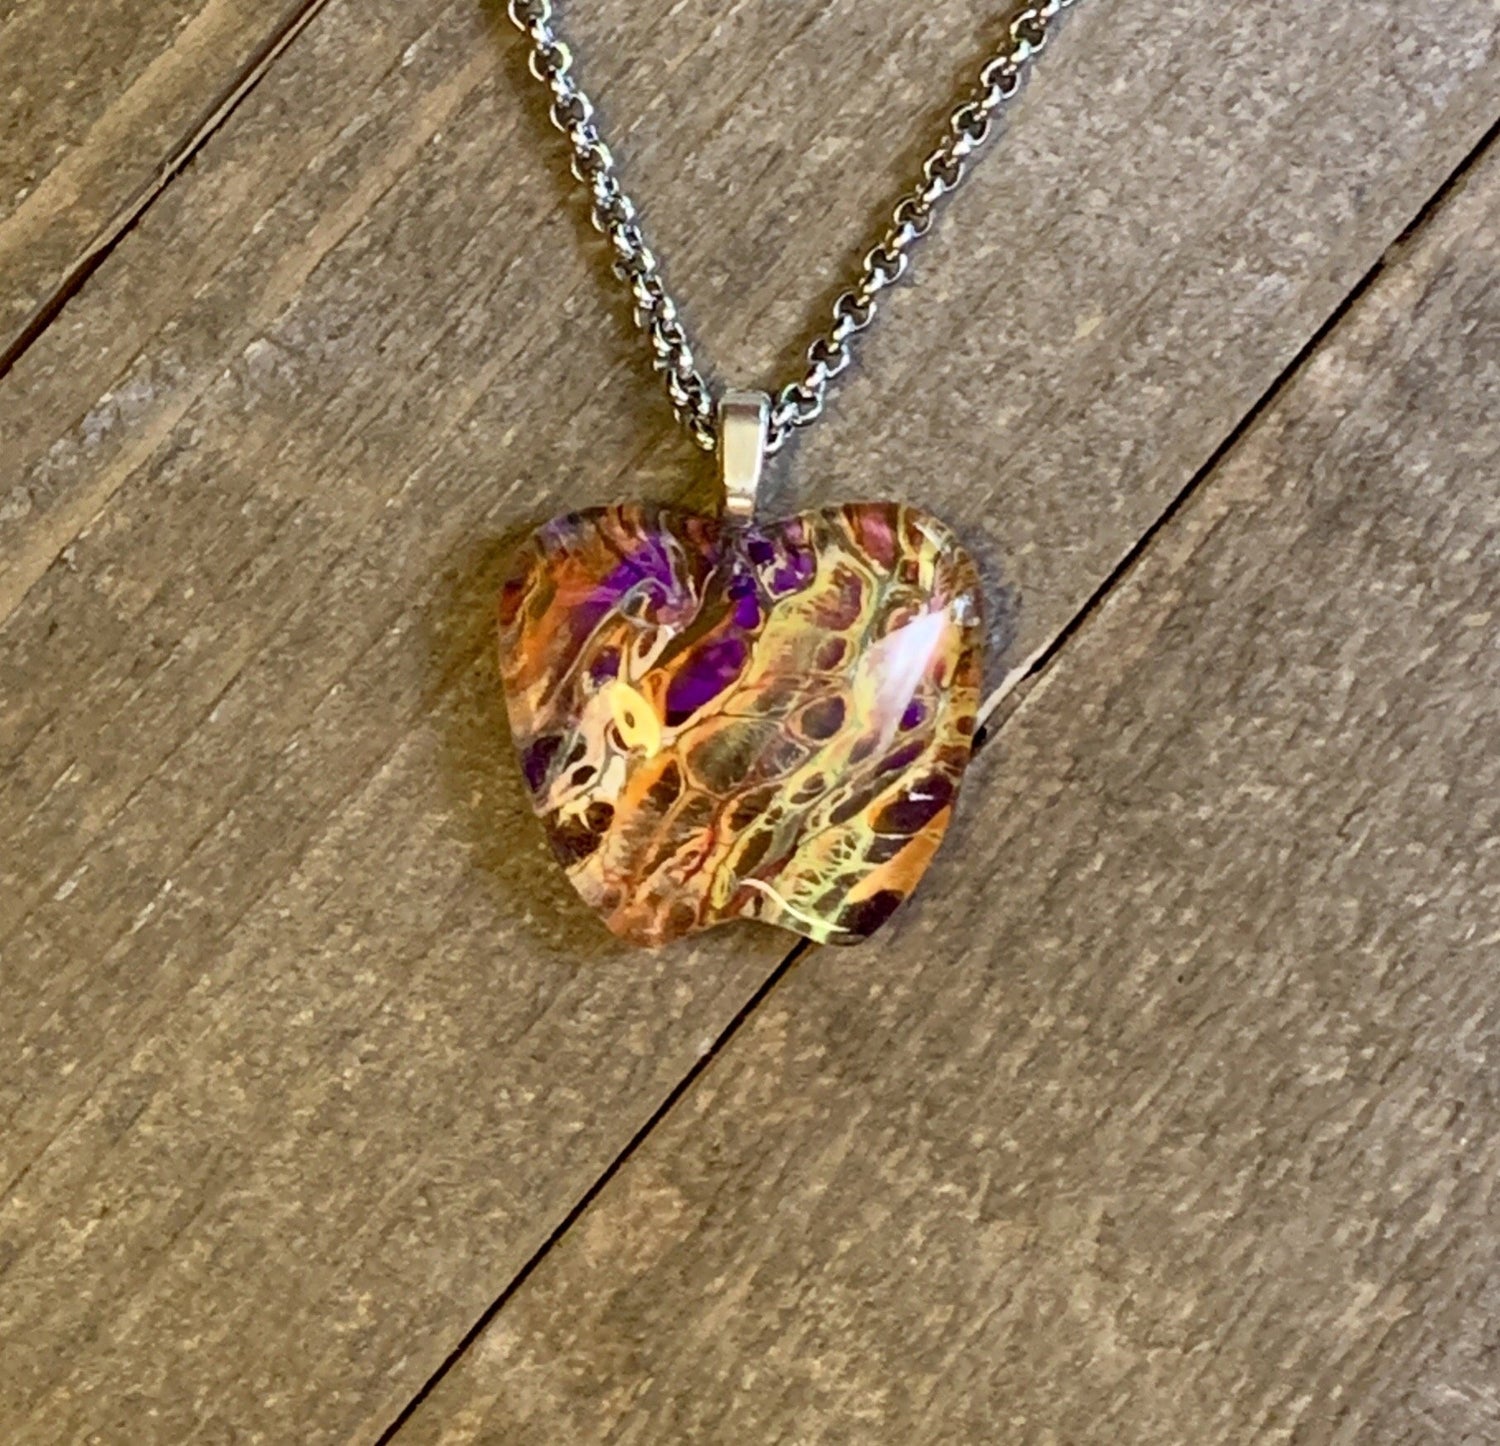 Tray-less Wearable Art Apple Pendant - Cinder House Creations